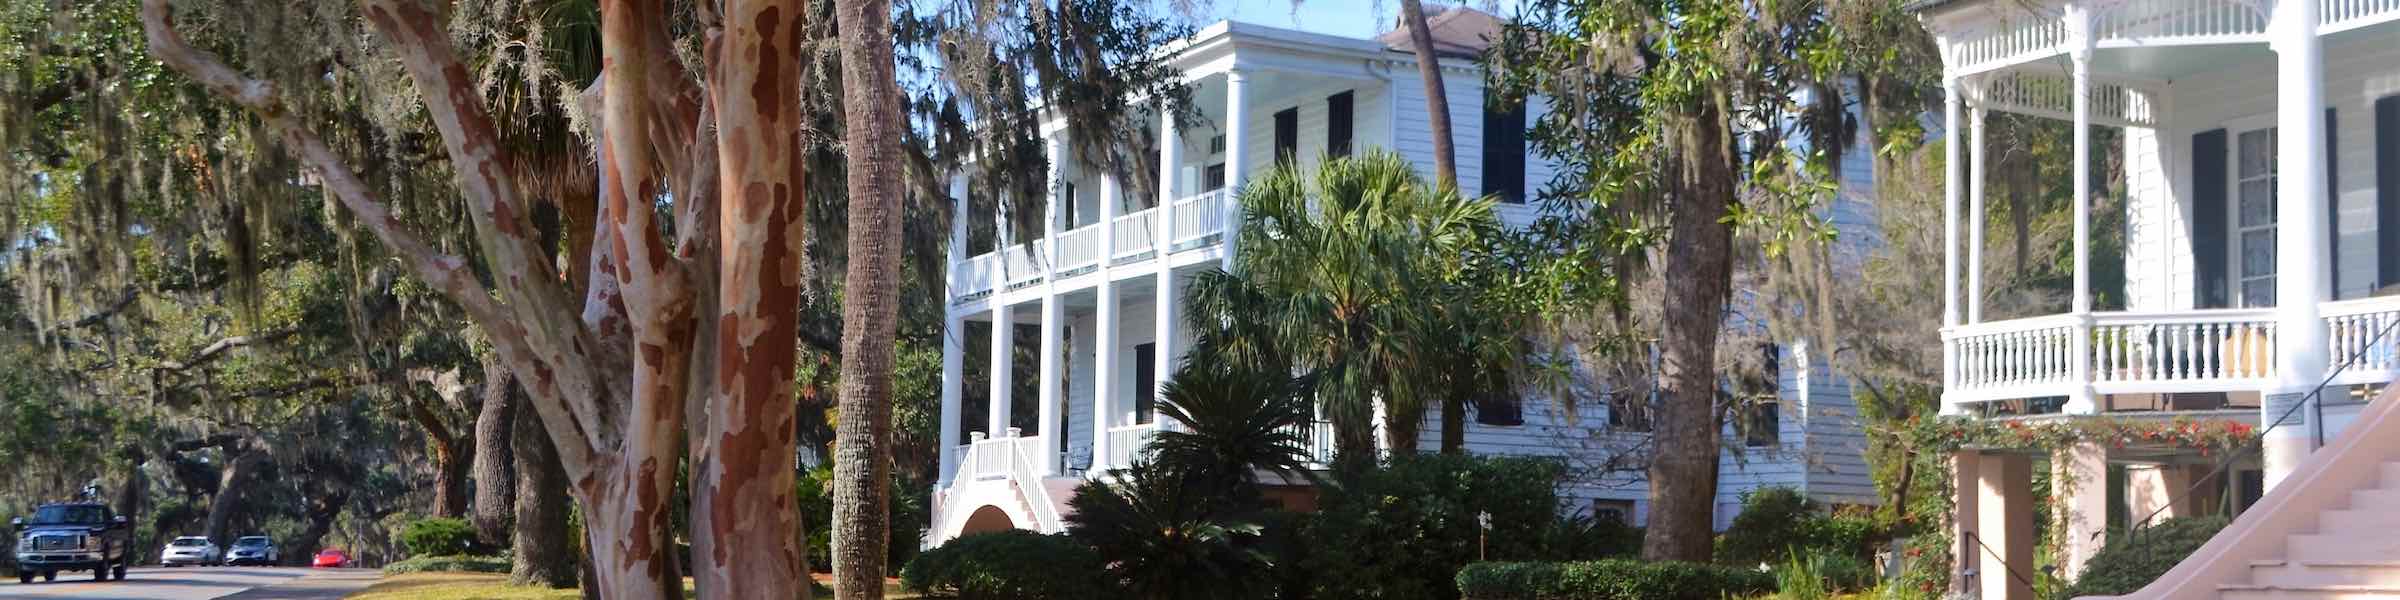 Historic mansion and crepe myrtle tree on Bay Street, Beaufort, SC.